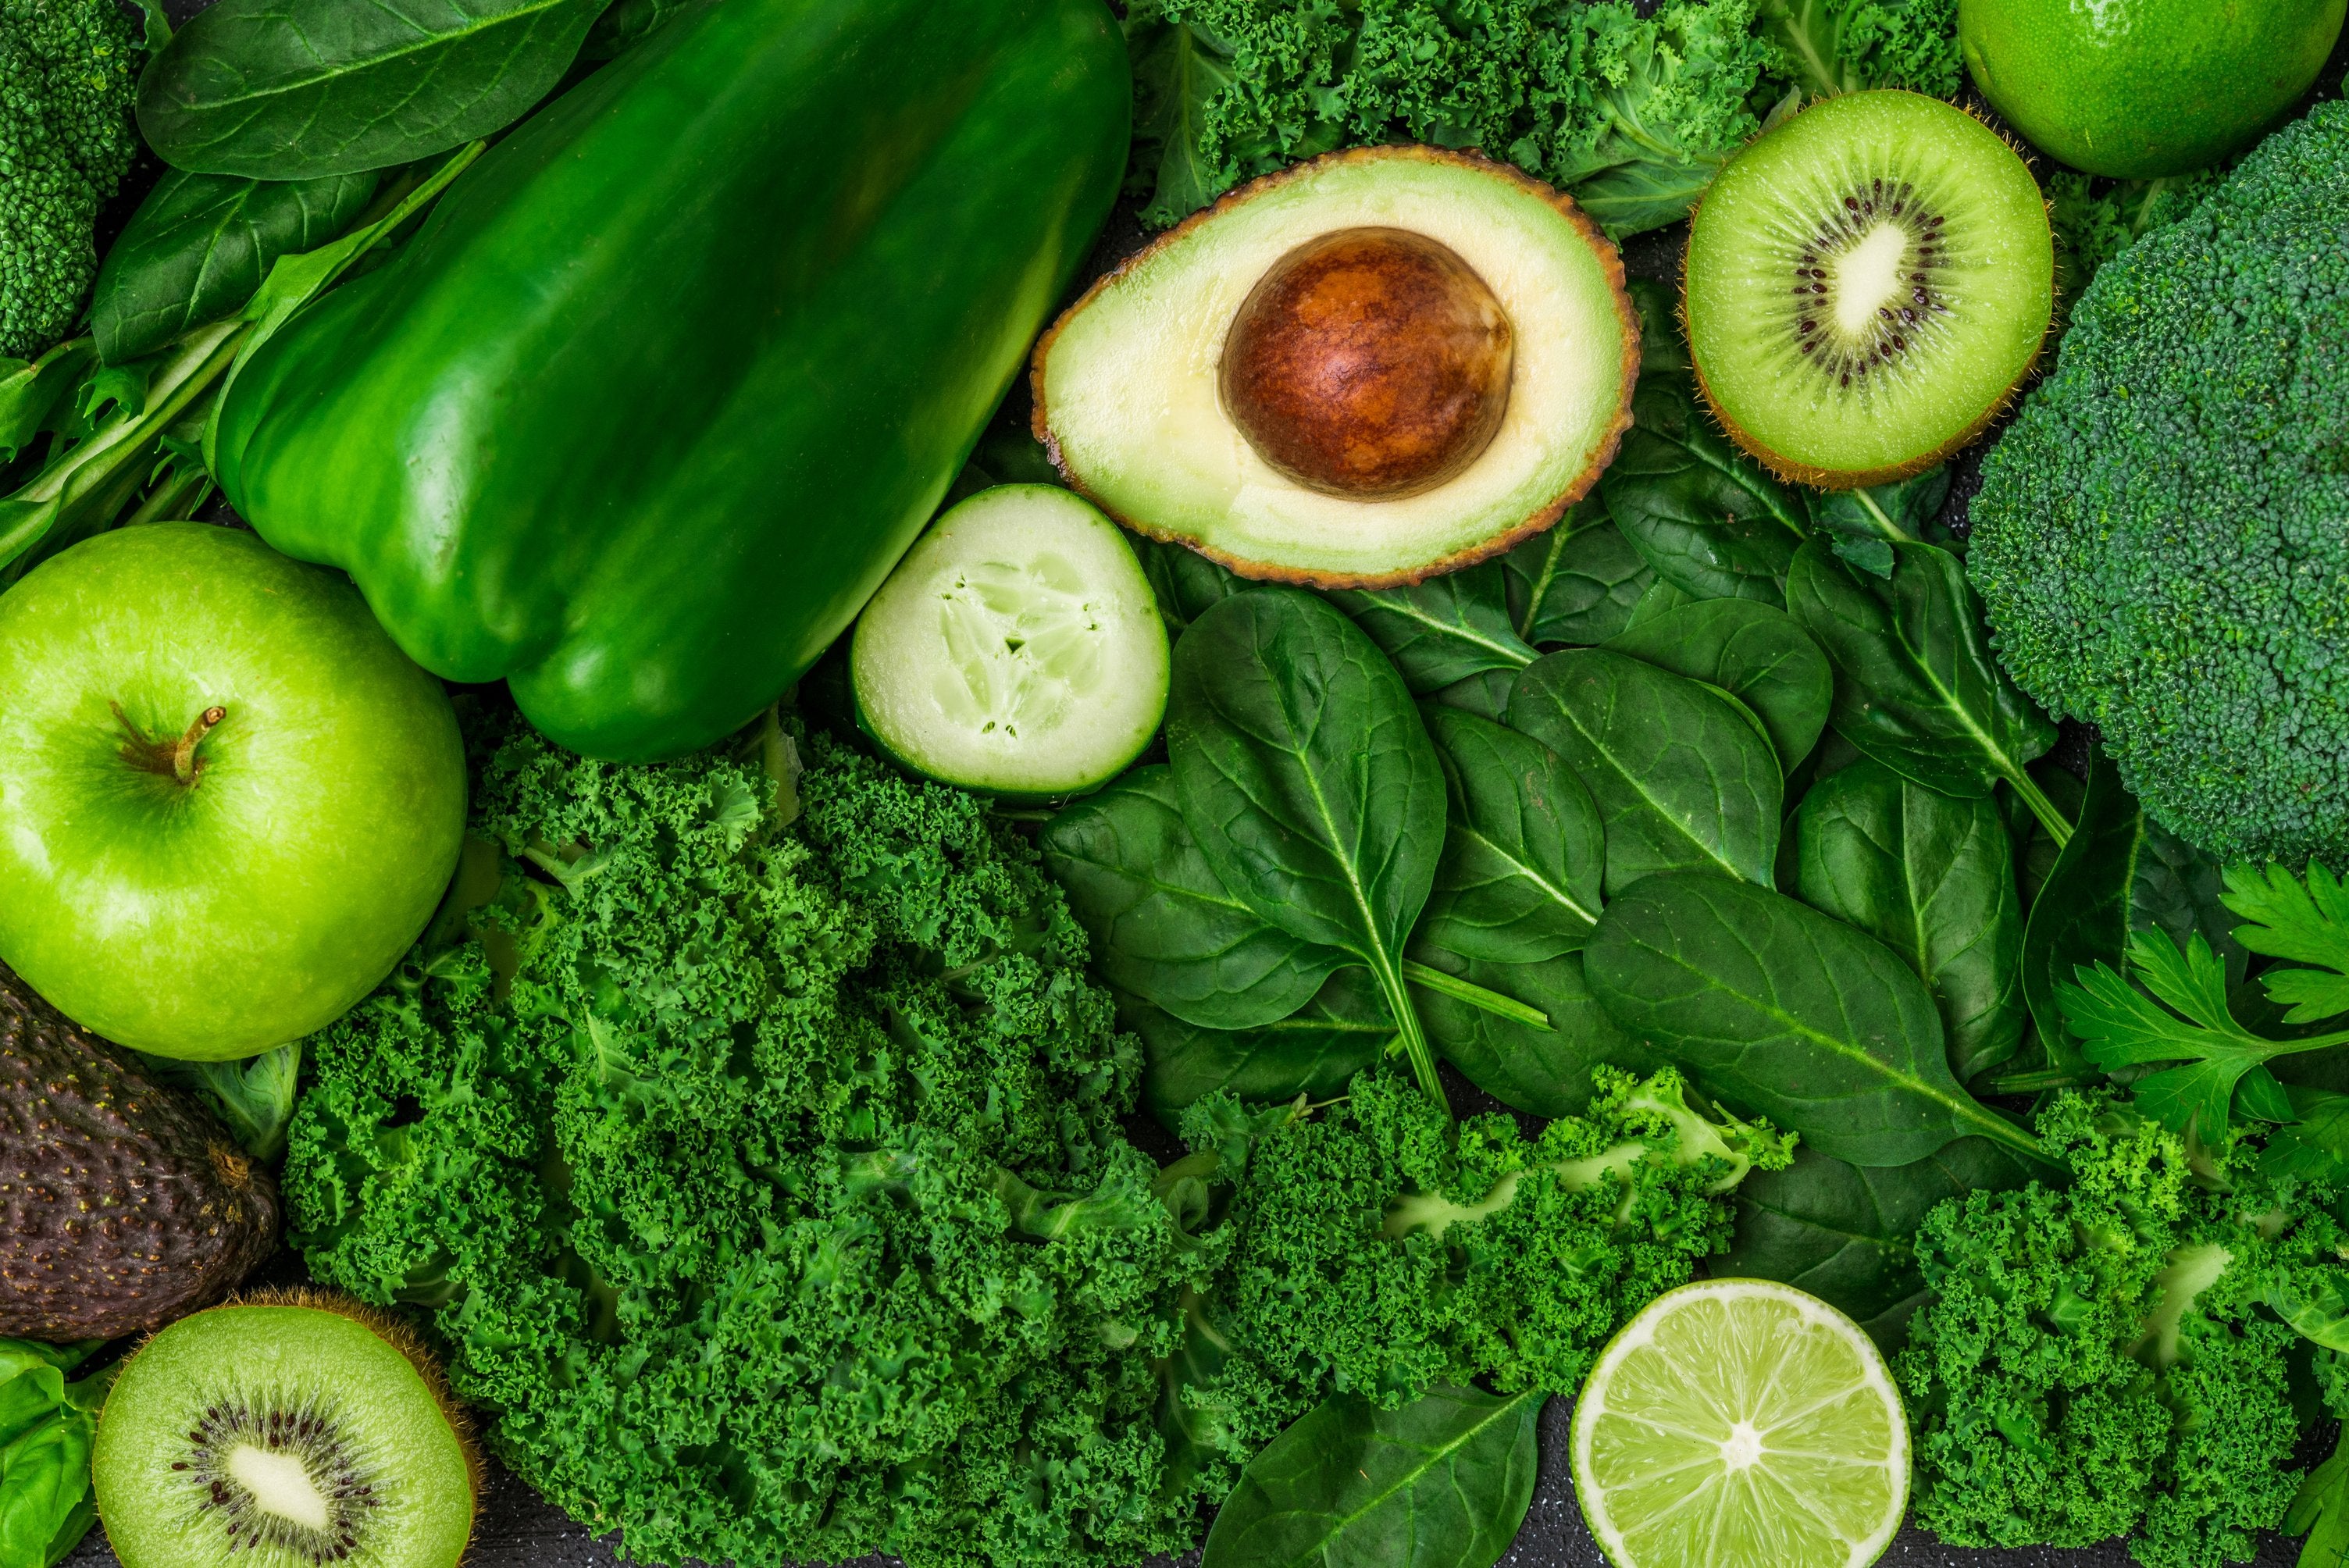 image showcasing a variety of green vegetables in different forms, suggestive of a treatment or therapy